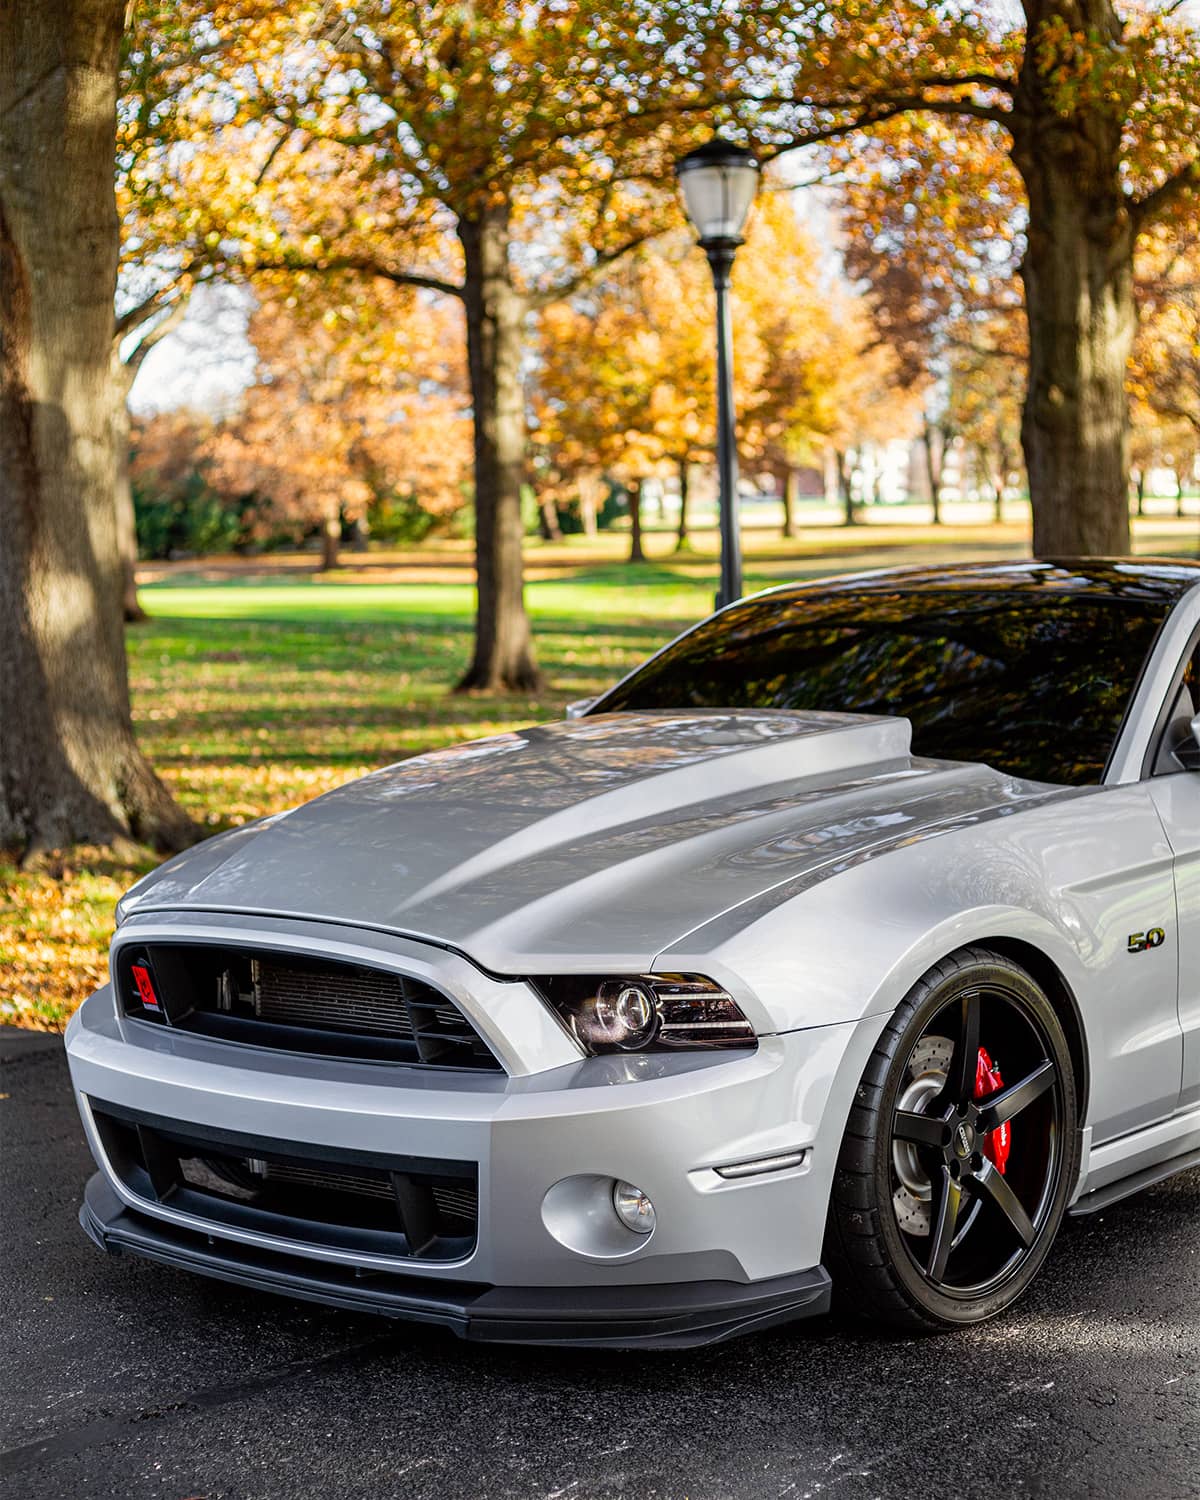 Fod Mustang GT S197 with Shelby GT500 full front end bumper conversion